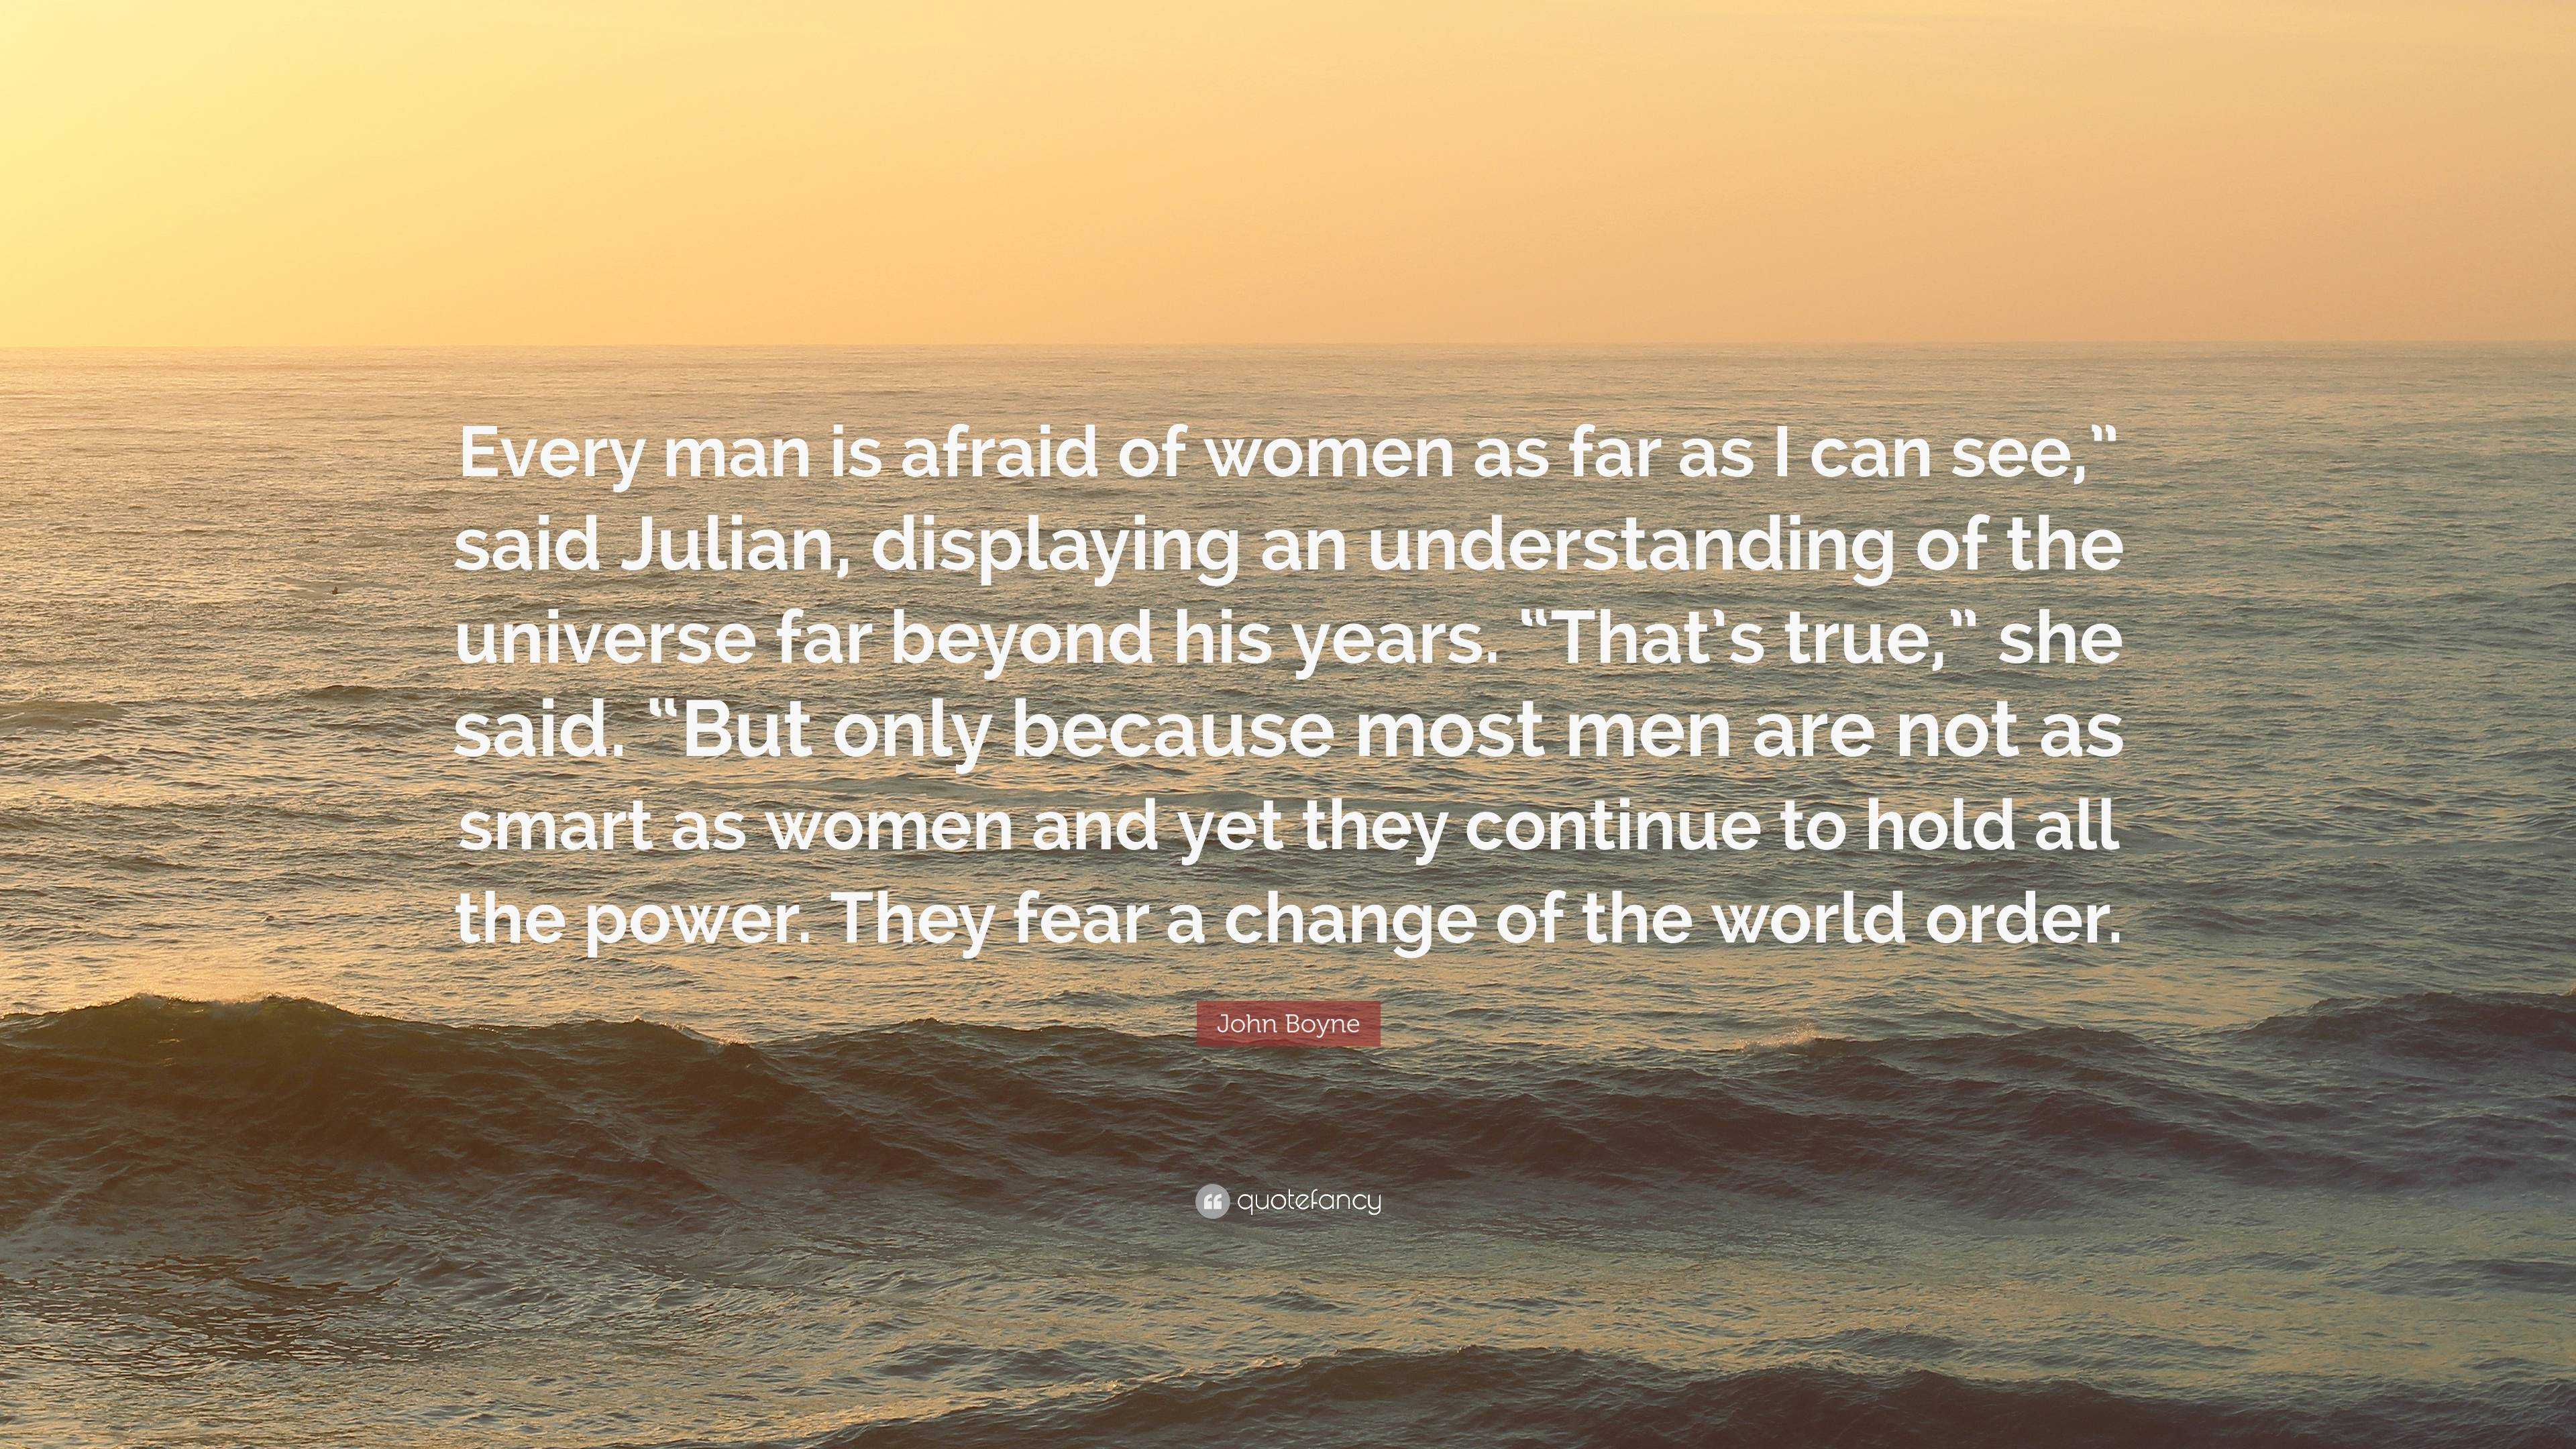 Powerful Women and the Men Who Fear Them